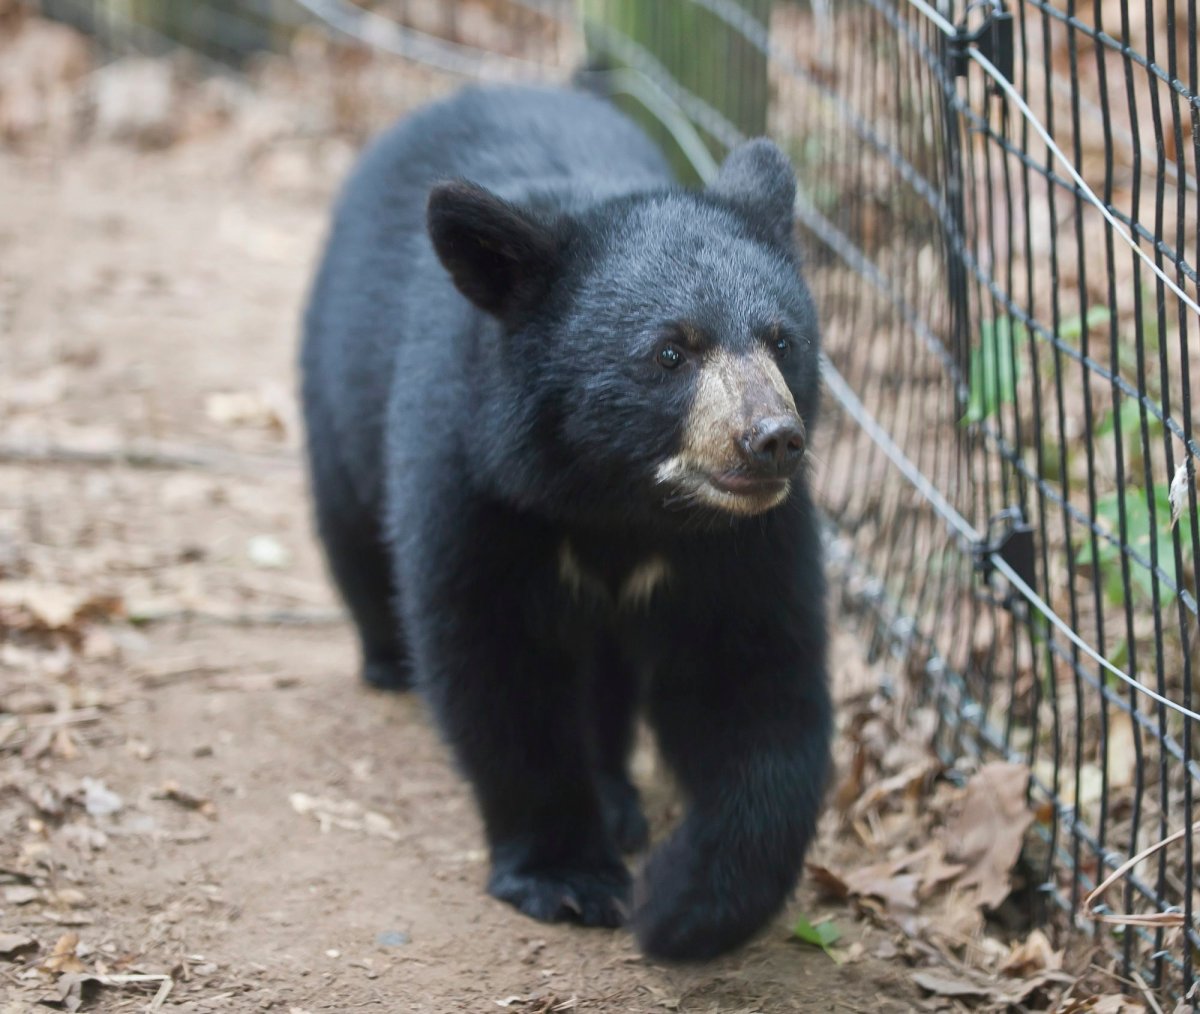 An orphaned cub, one of three Alaskan black bear cubs recently rescued from the wild, is seen at the Binder Park Zoo July 26, 2012, in Battle Creek, Mich.